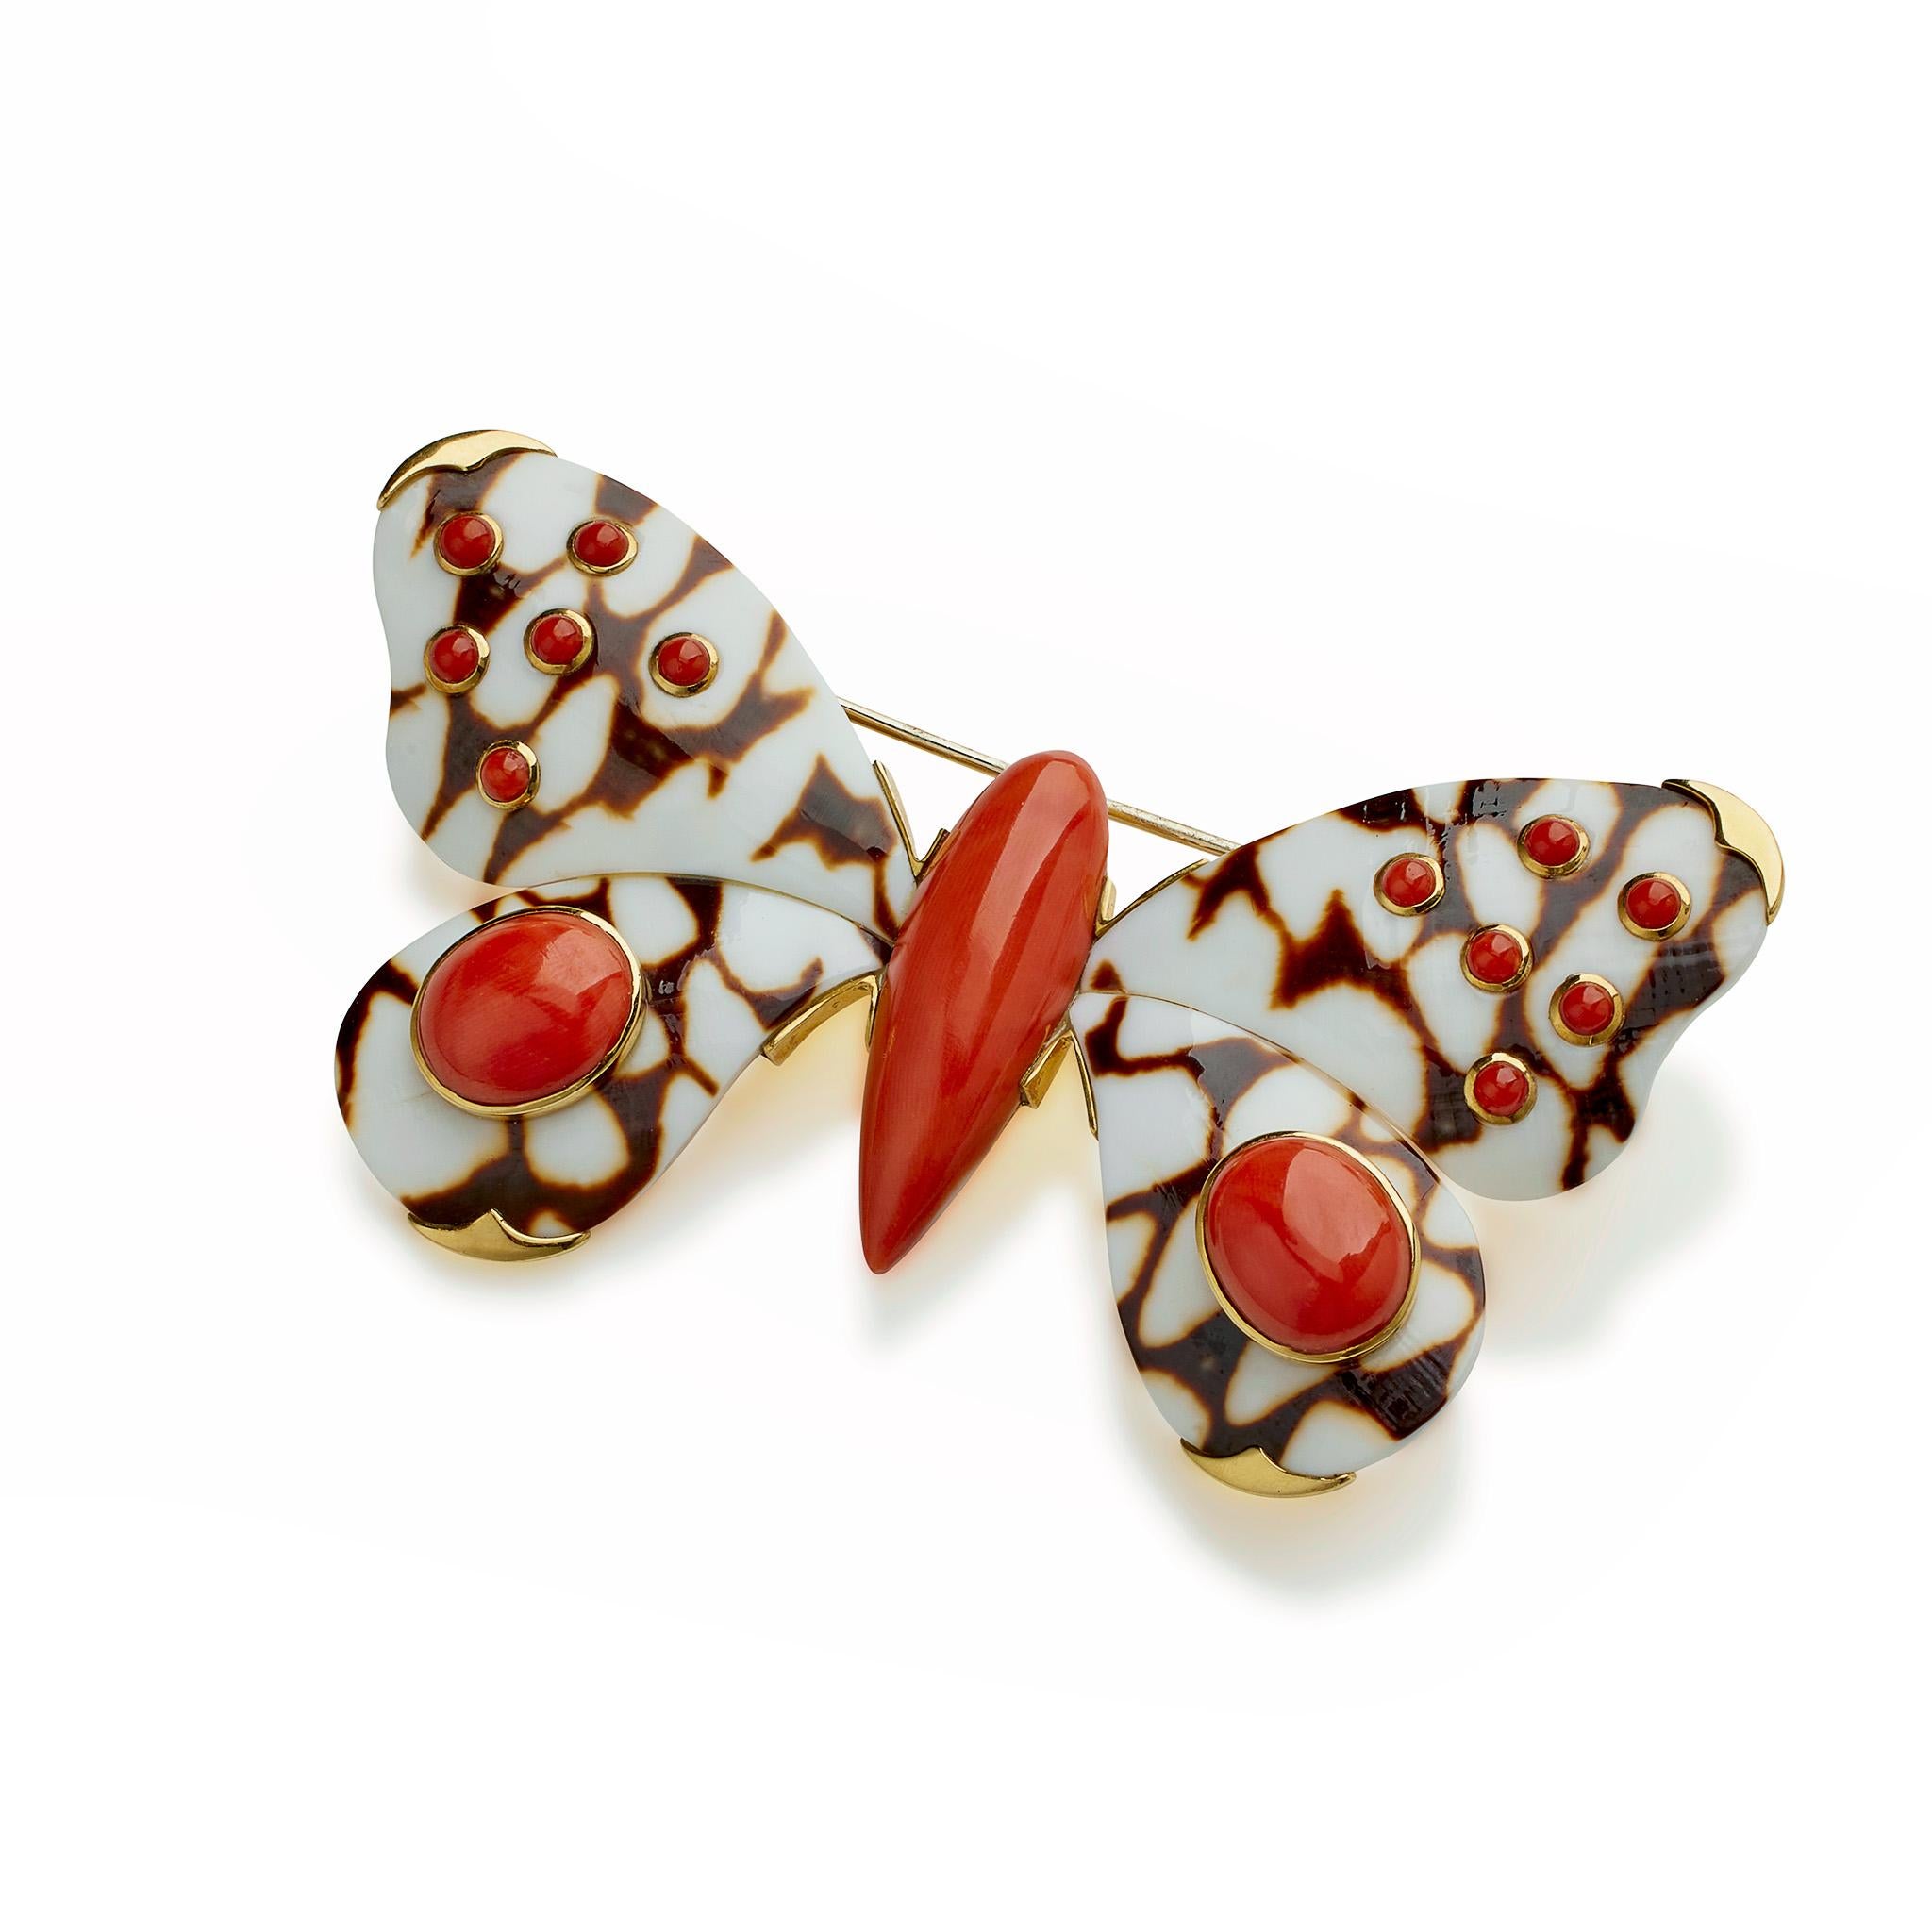 This contemporary Trianon butterfly brooch is composed of shell, coral and 18K Gold. It is designed as a butterfly with coral body and carved brown on white patterned shell wings set with coral cabochons, mounted in 18K gold. Beautifully made, this